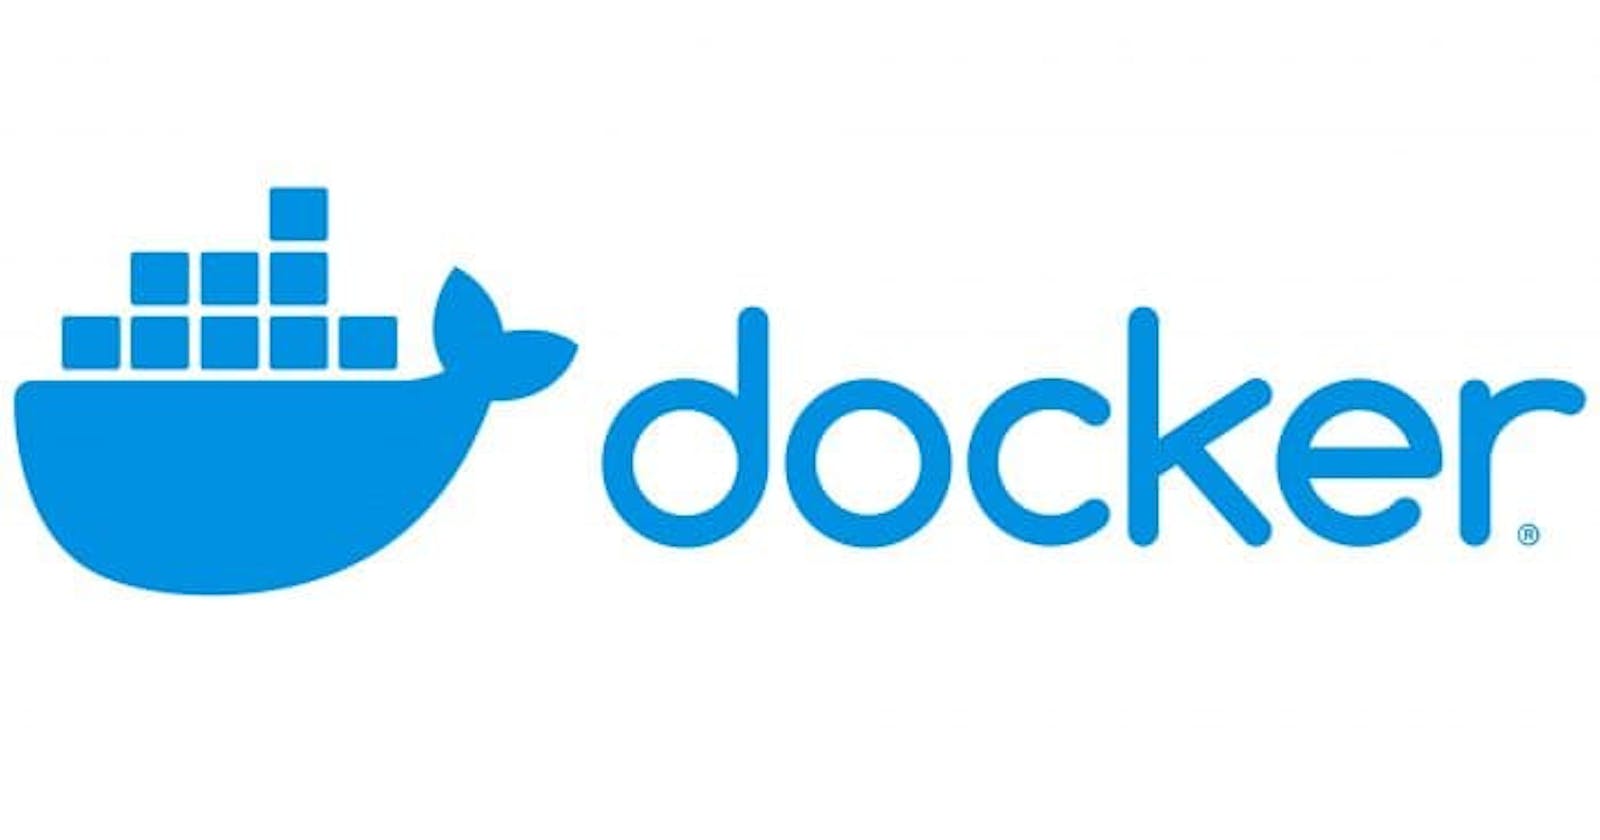 Use Cases for creating a Docker image from a container